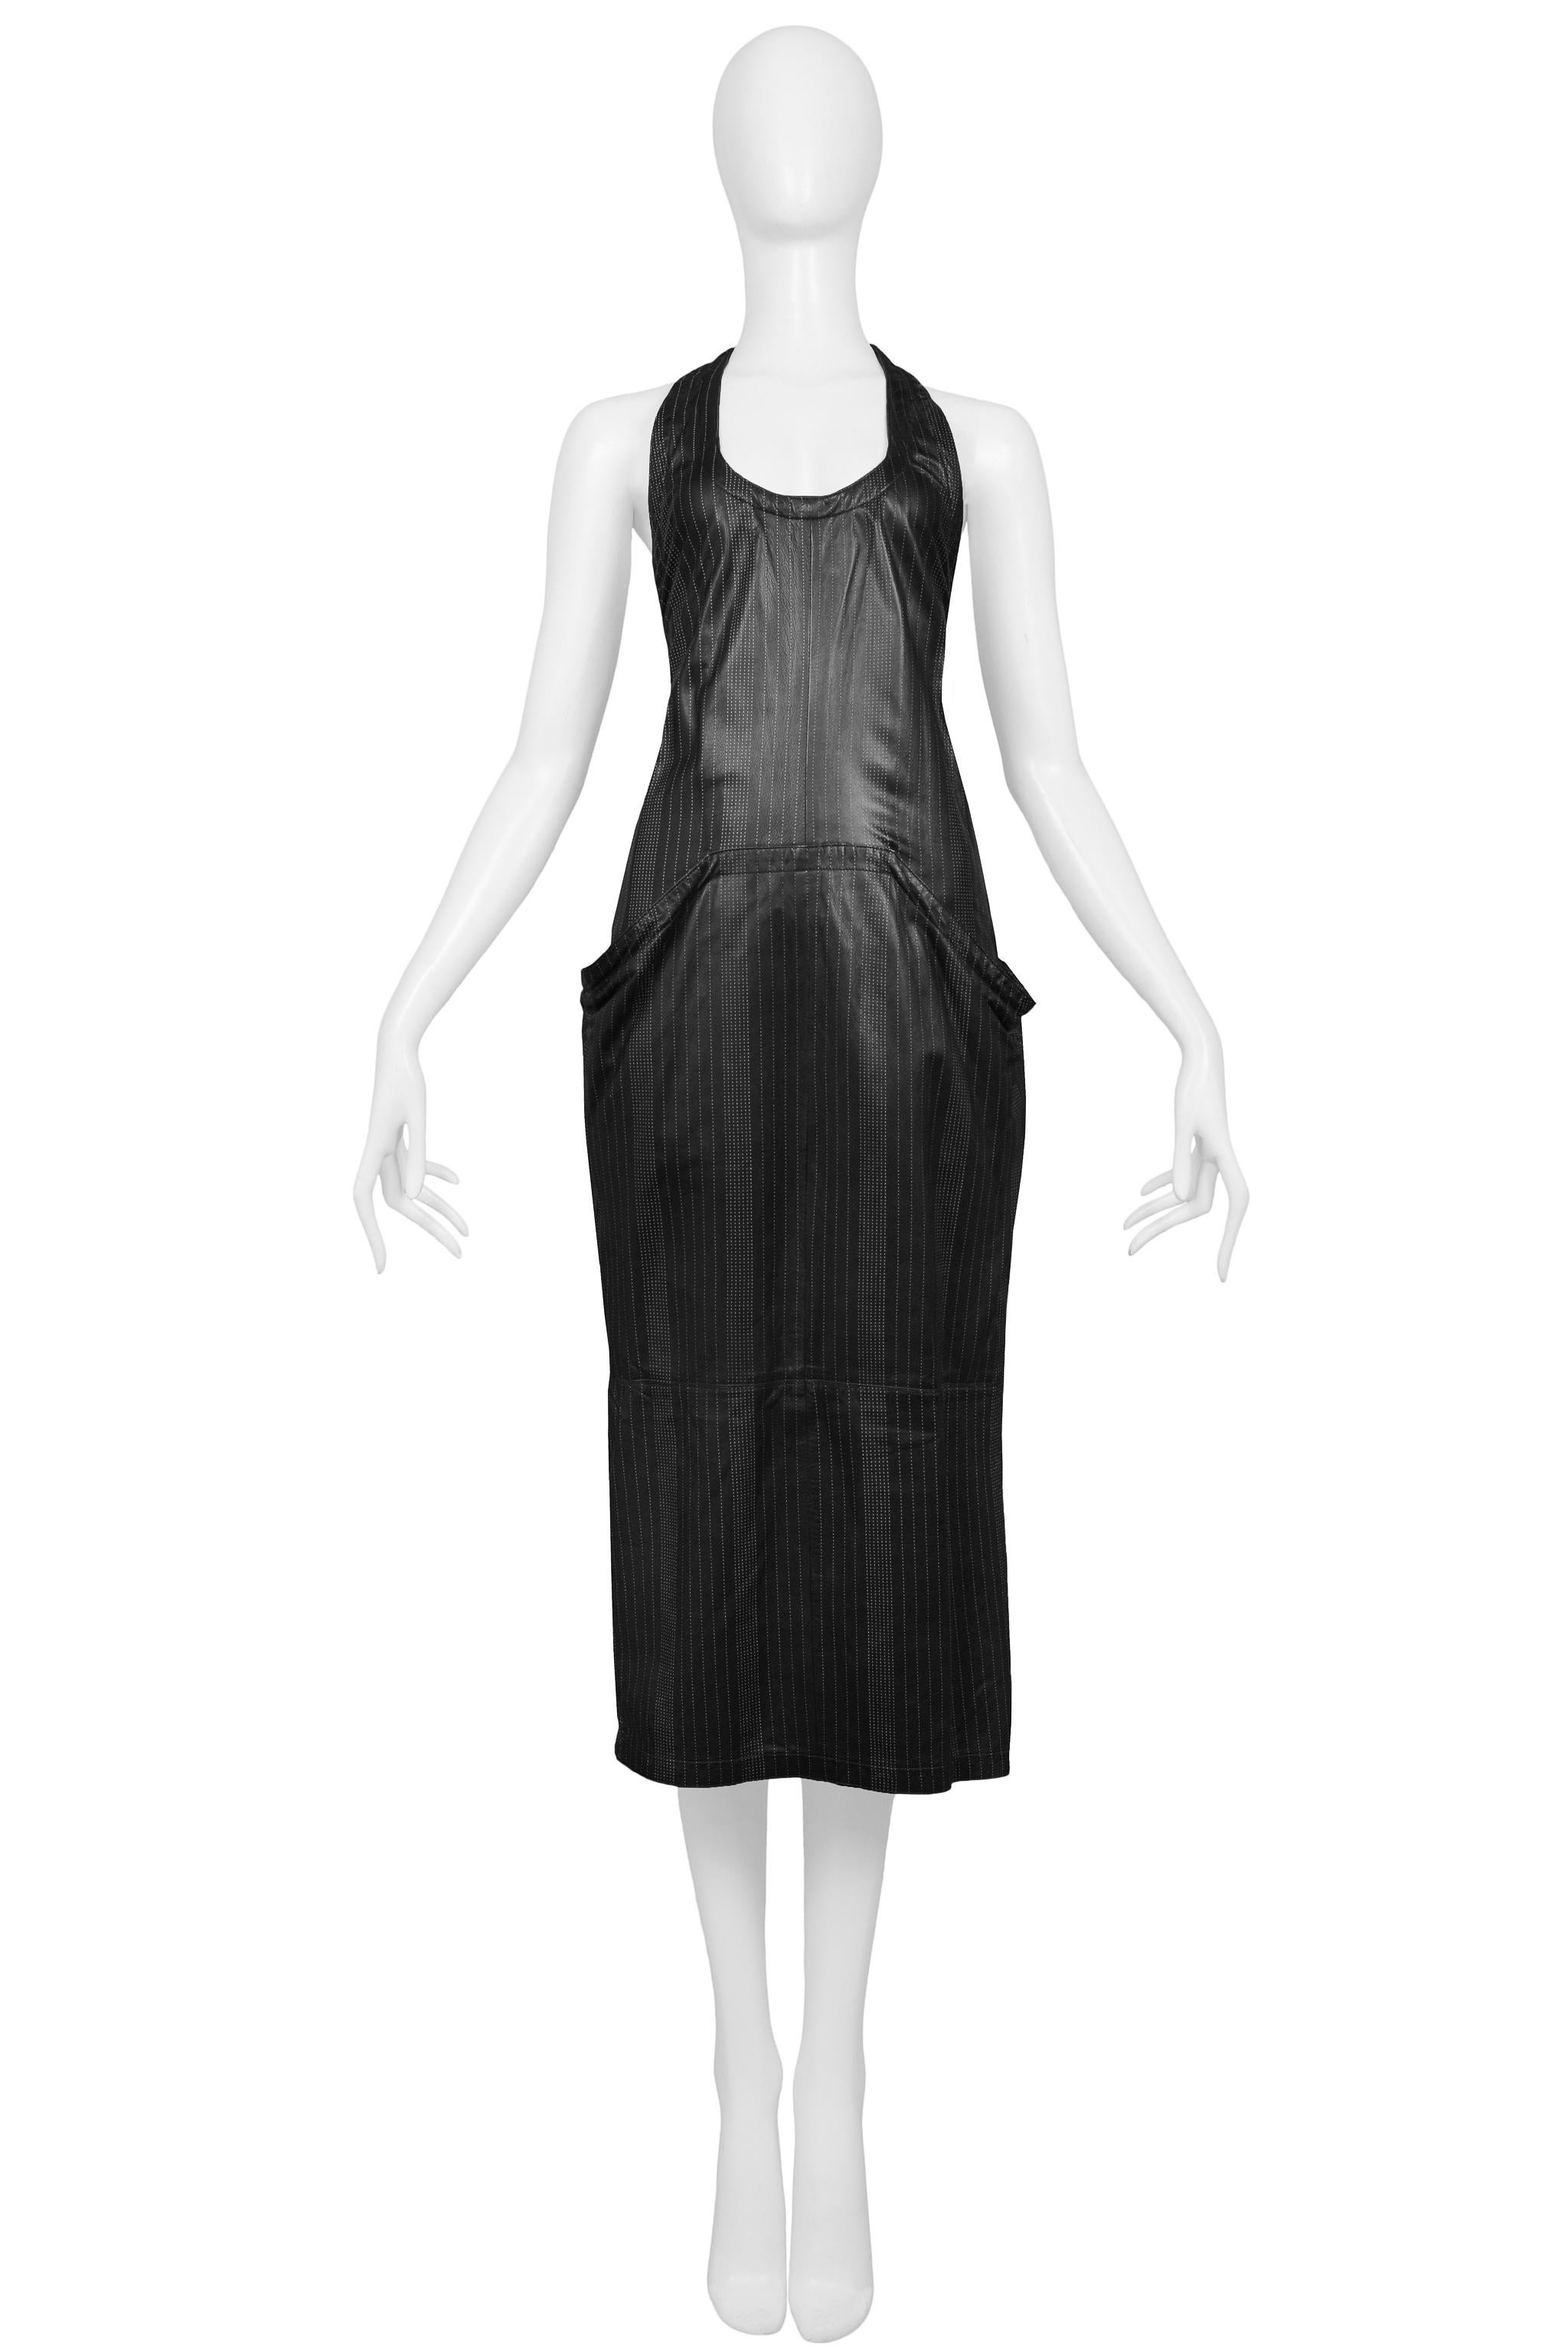 Resurrection Vintage is excited to offer Gianni Versace black leather day dress featuring an dotted pinstriping,tank body, front kangaroo pocket, and fitted sexy silhouette. 

Versace 
Size Label Missing - Today's size Small or 2-4
Measurements: